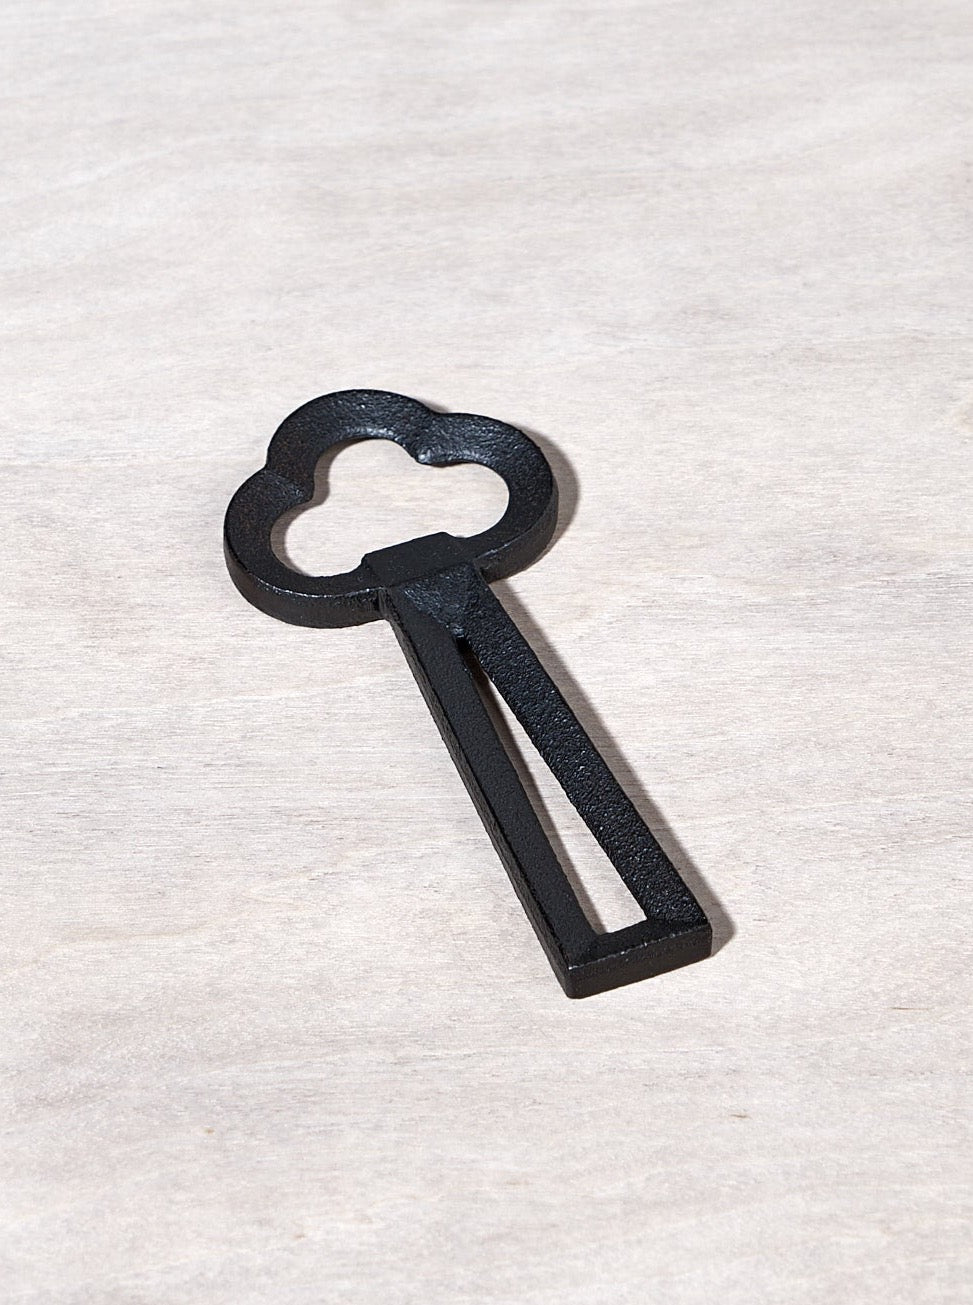 A Clover Bottle Opener – Black key shaped like a cloud on a wooden surface.